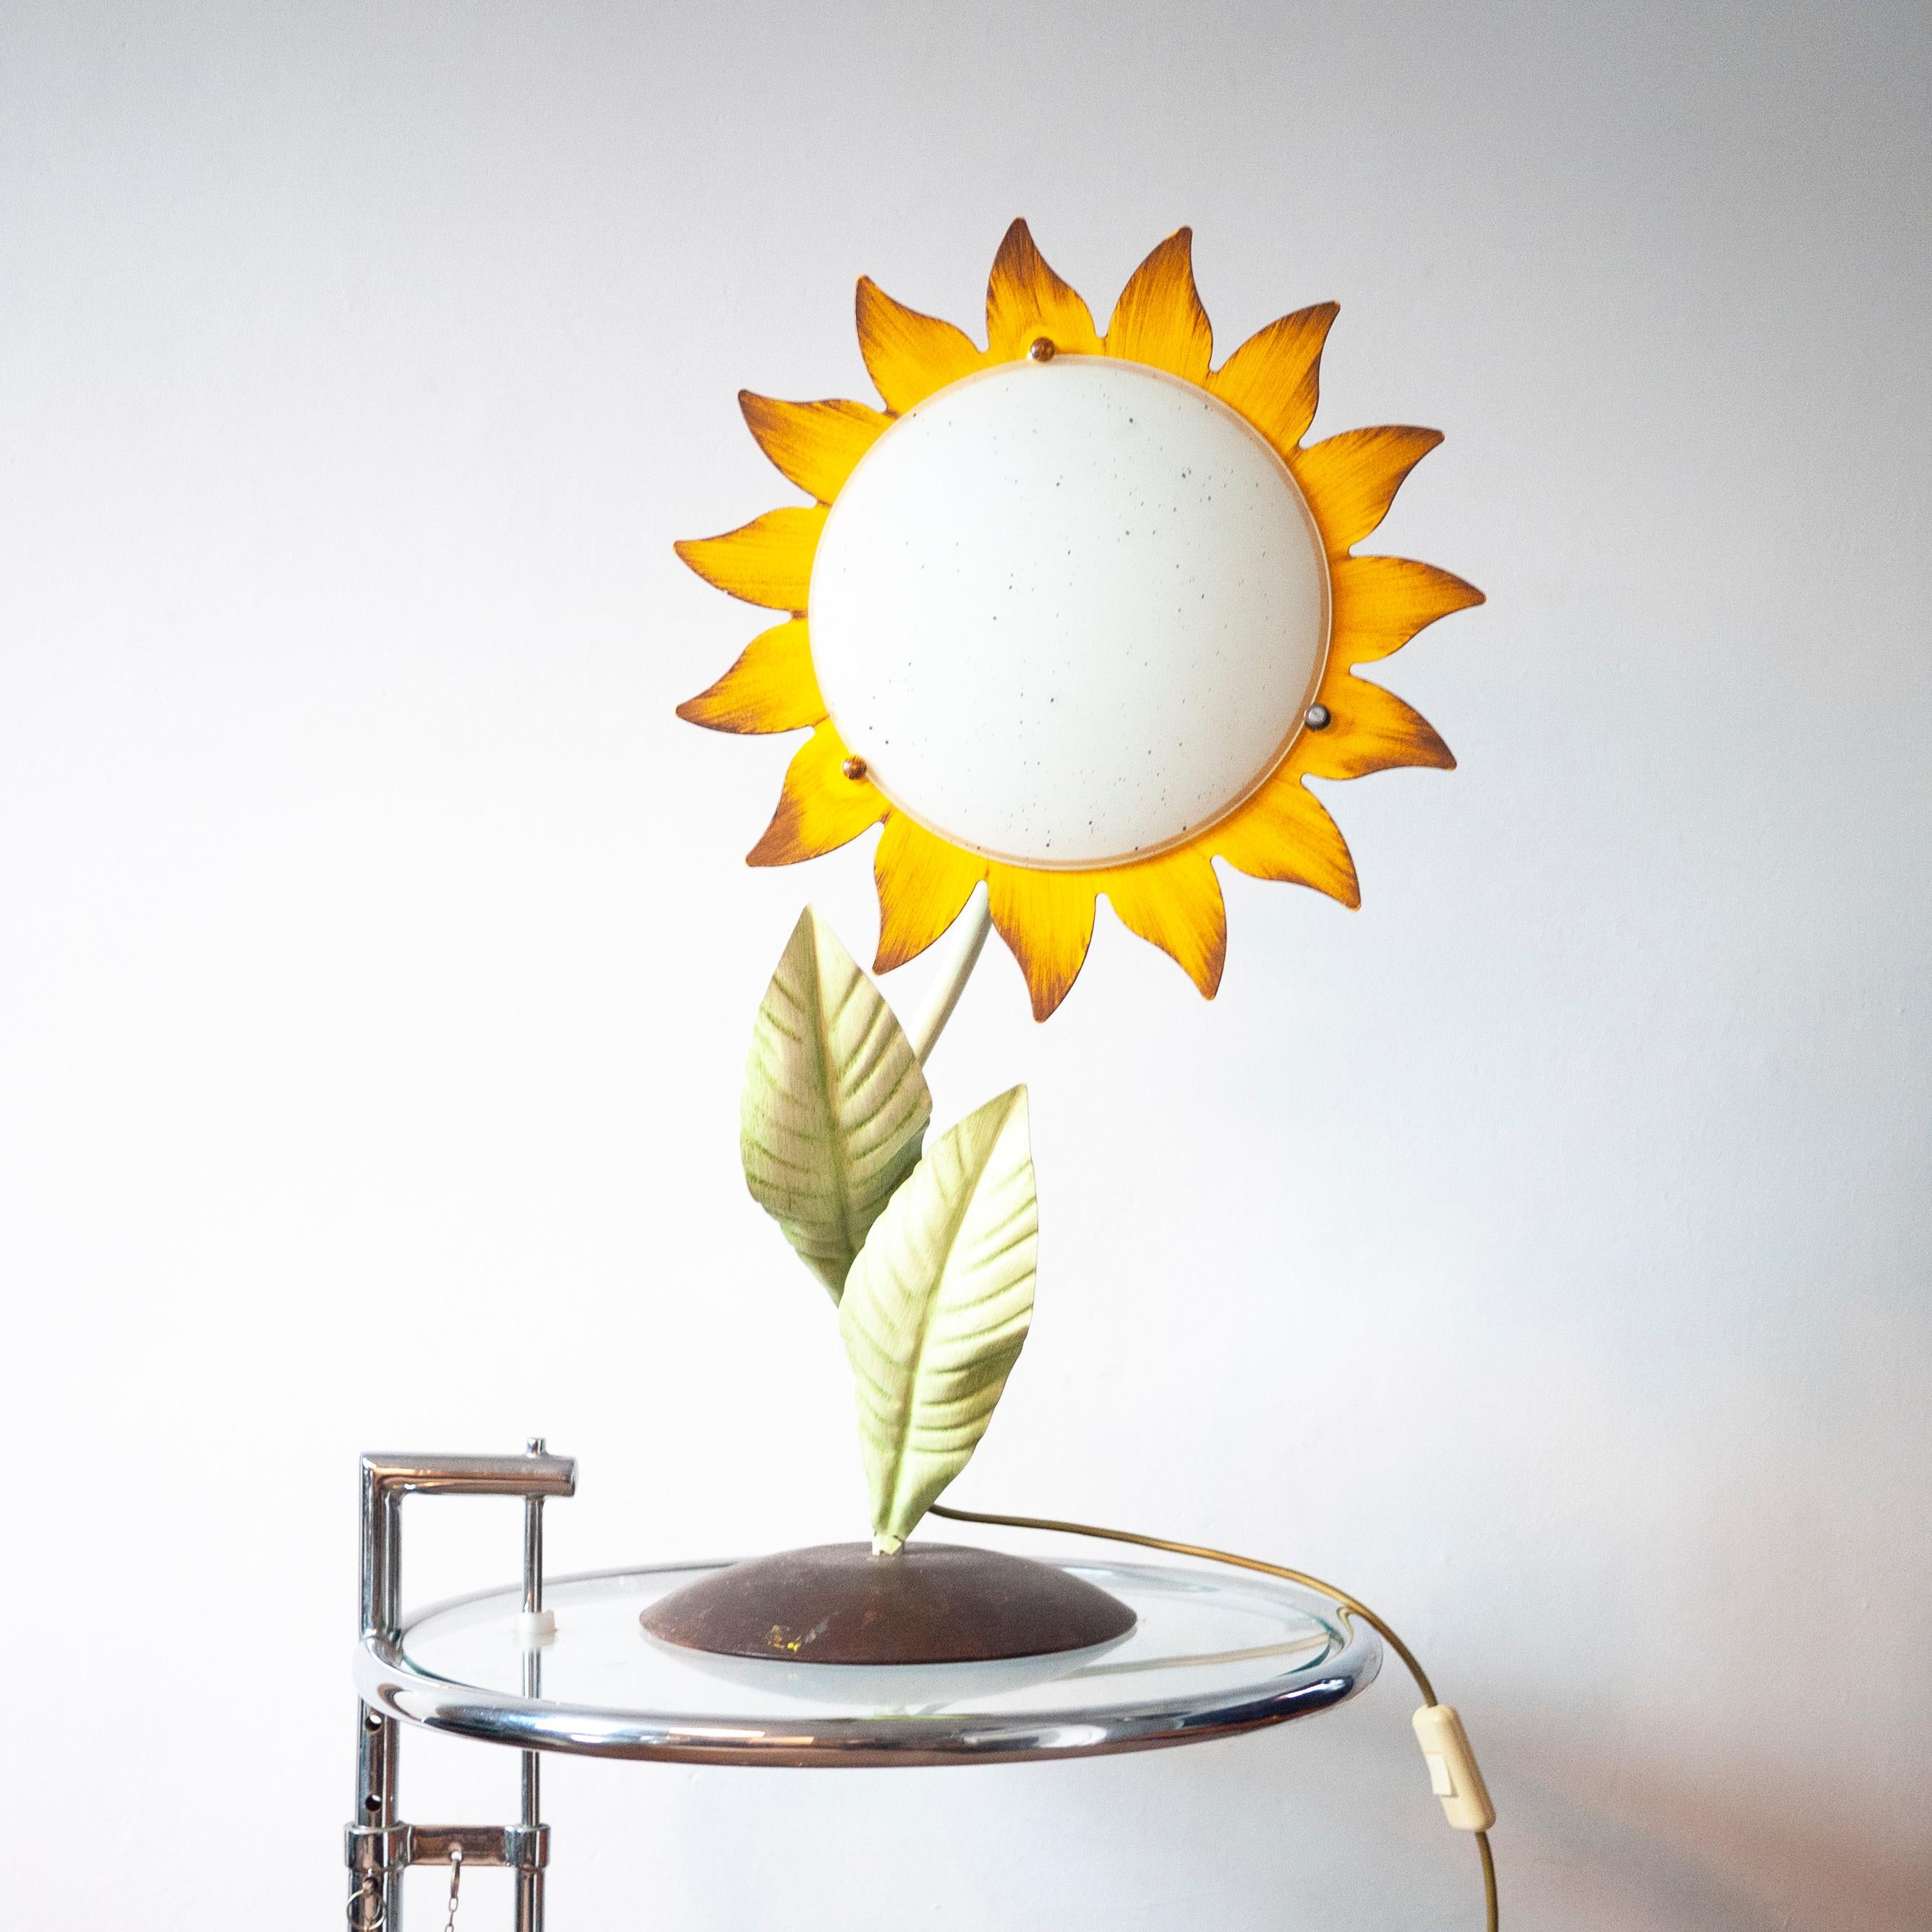 Decorative Midcentury Italian Metal Painted Sunflower Table Lamp, 1970s In Good Condition For Sale In Chesham, GB